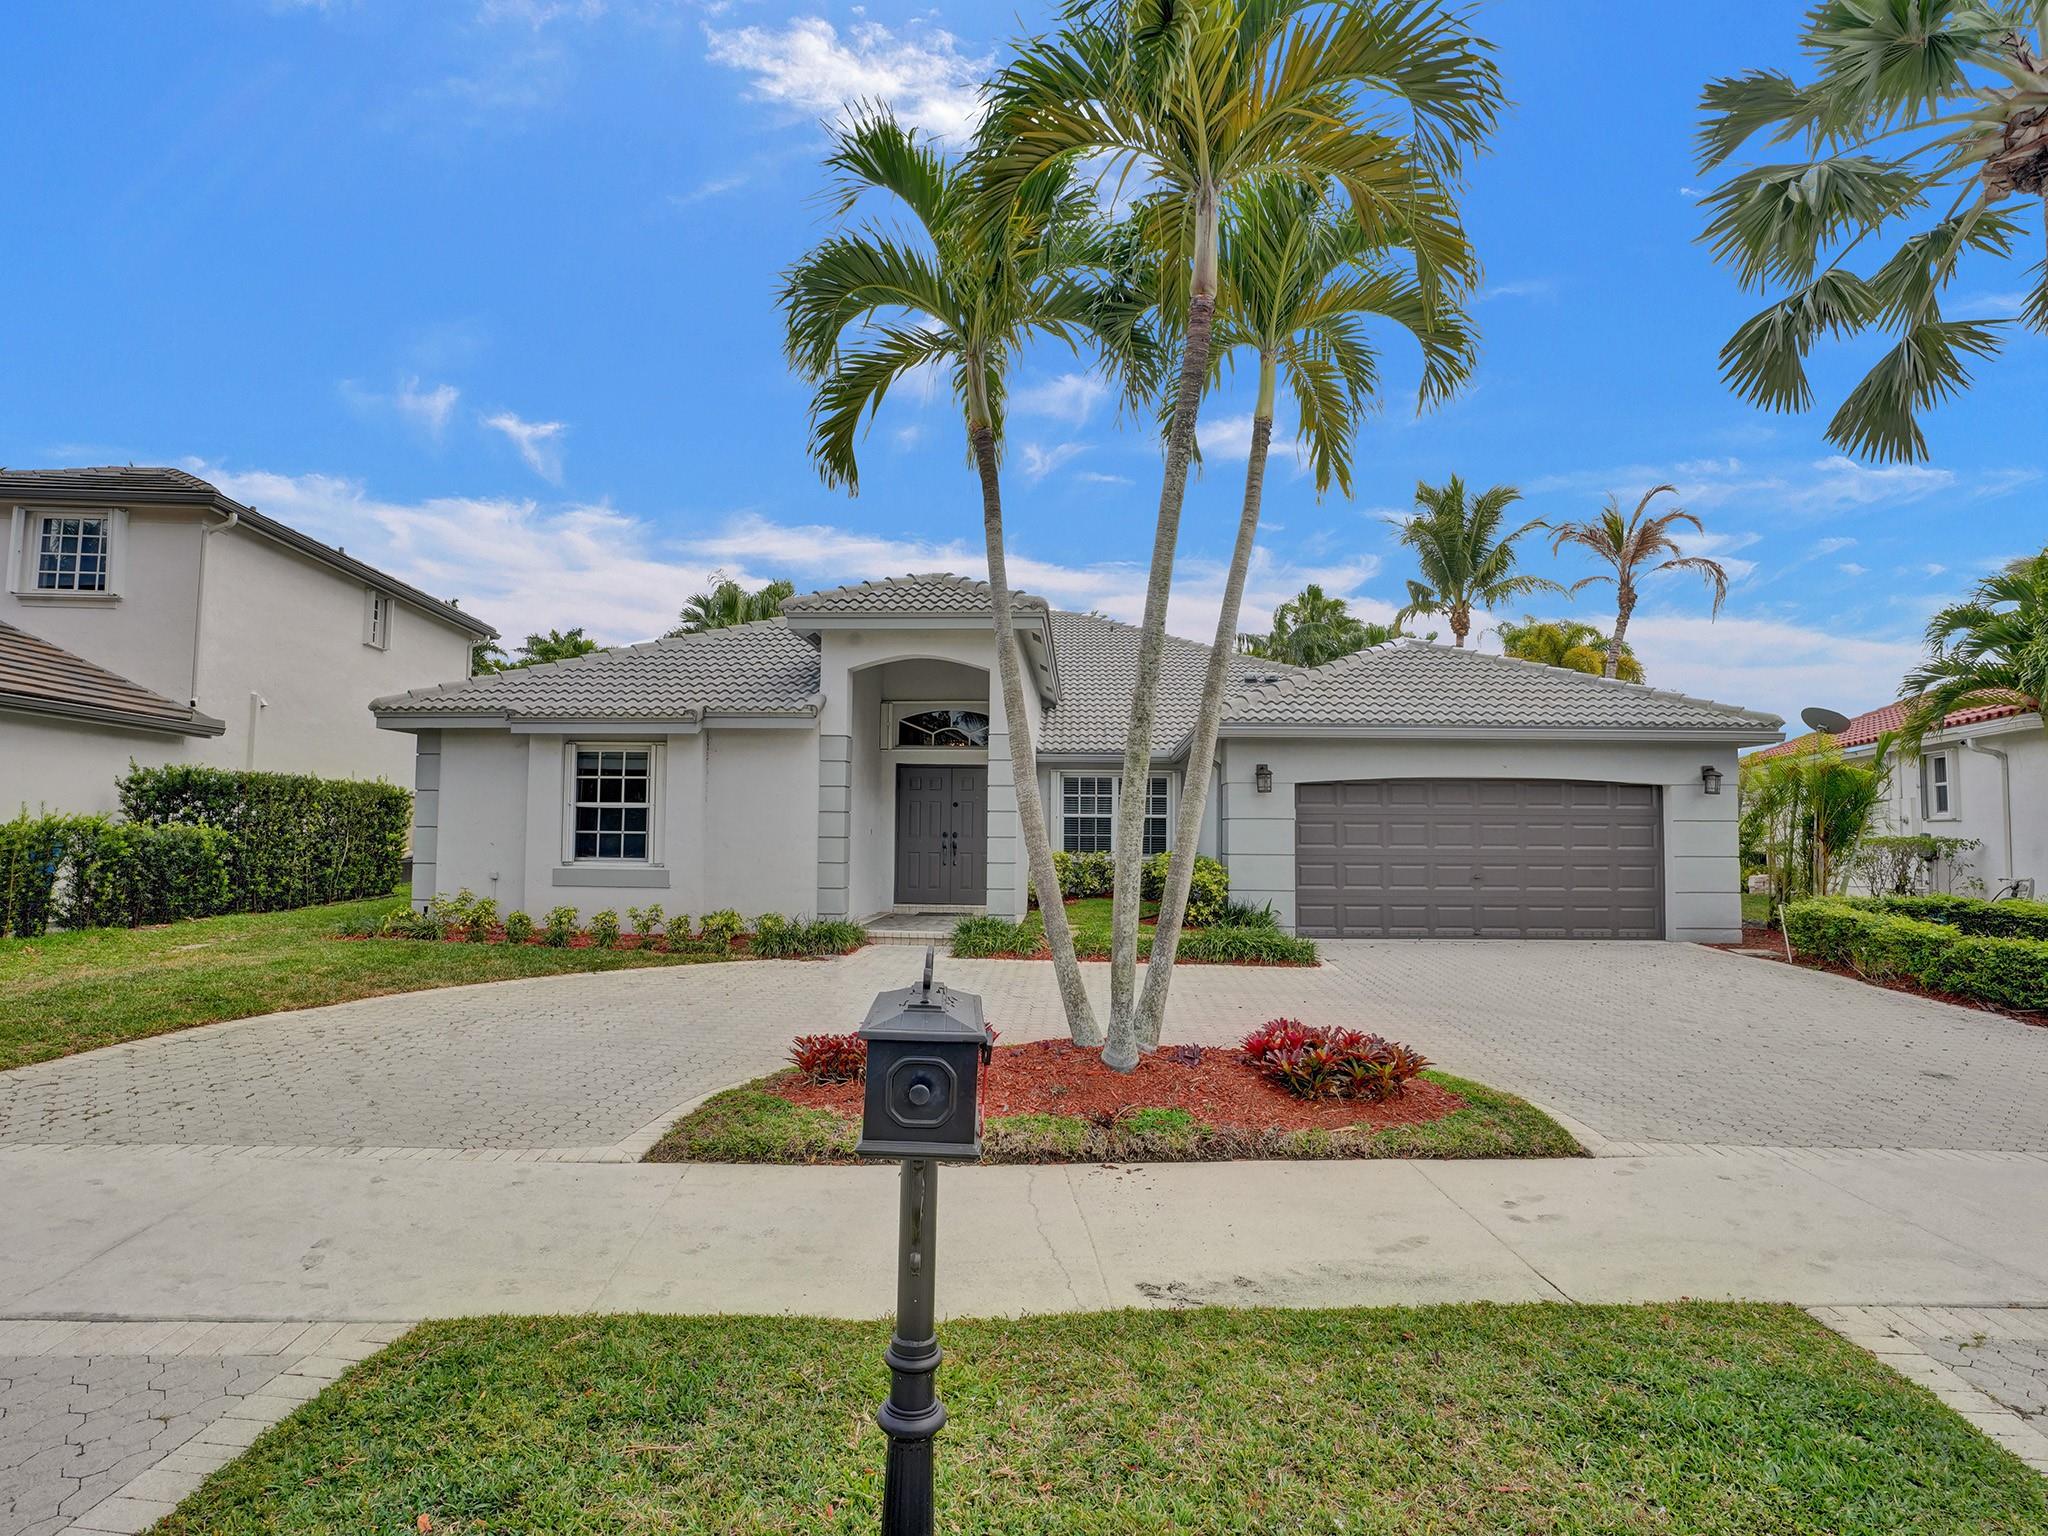 House for Sale in Weston, FL